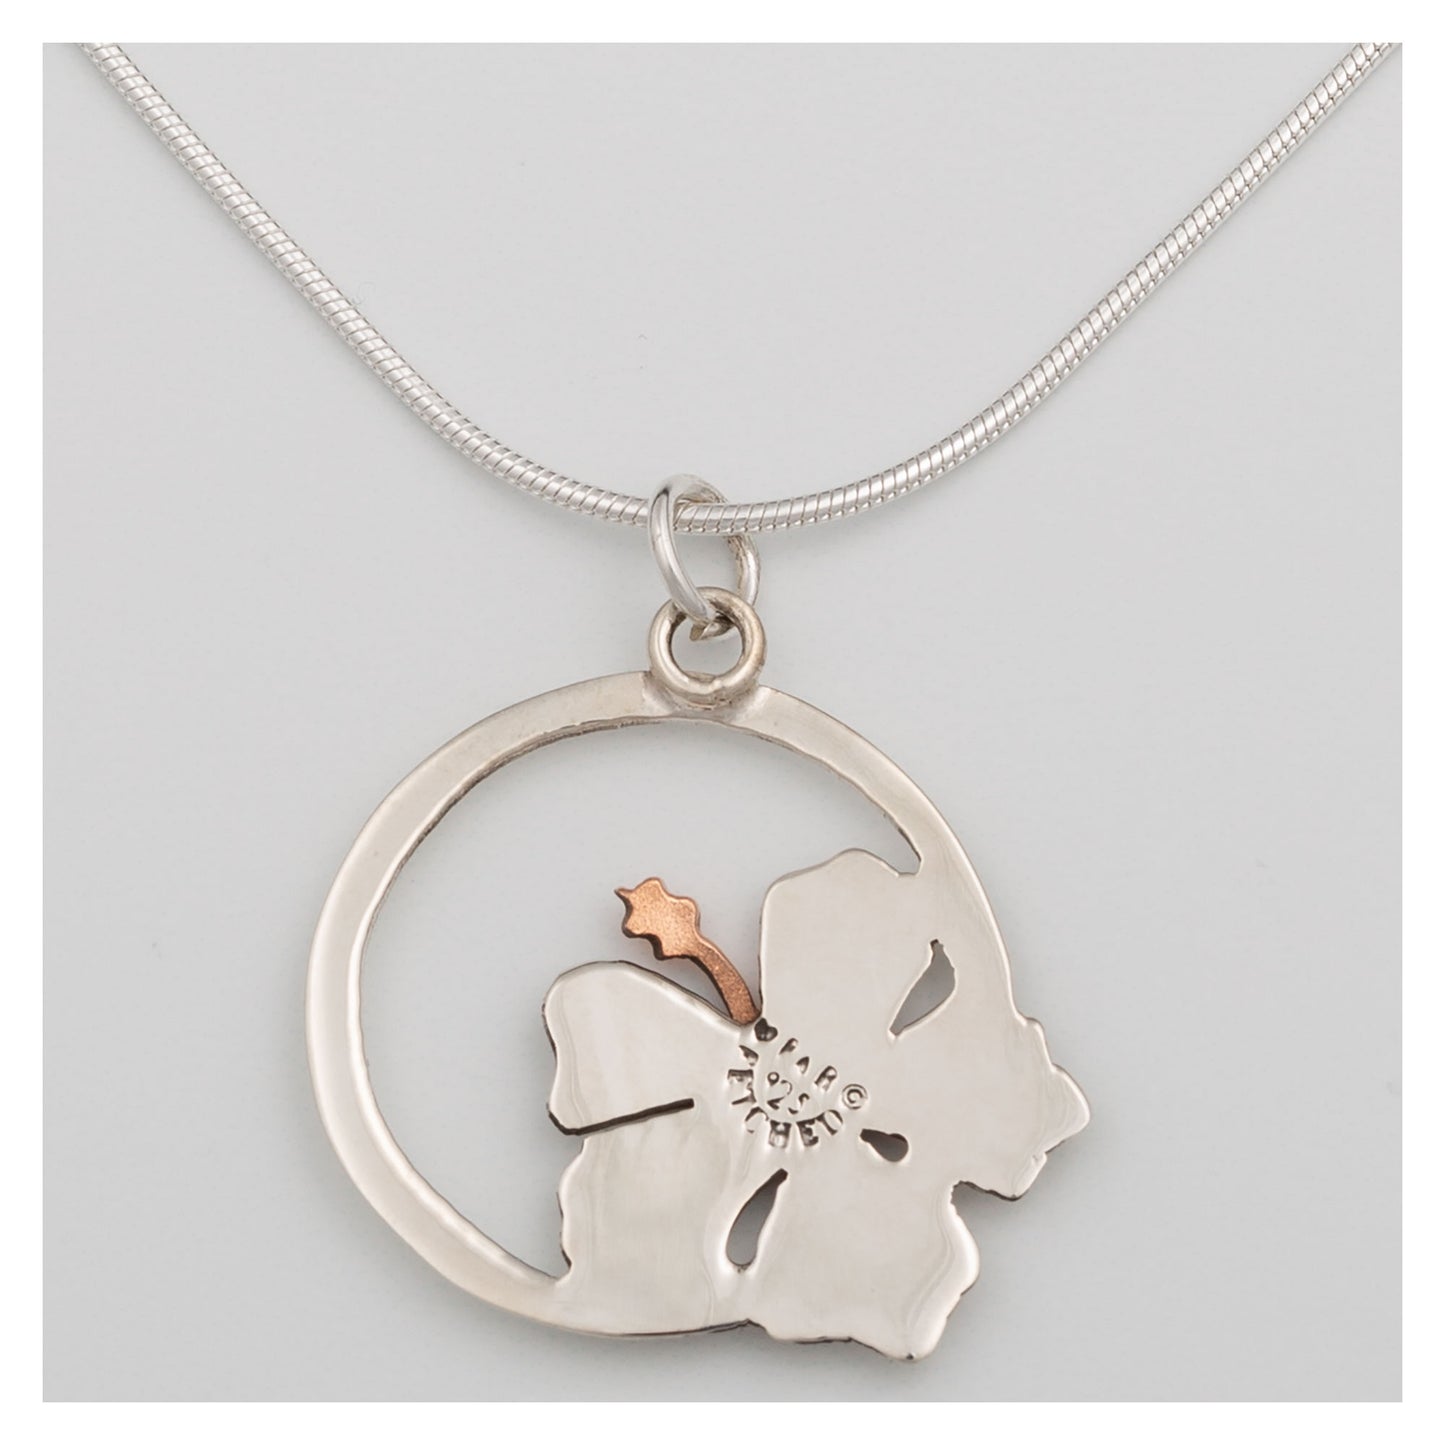 Blooming Flowers Sterling Necklace